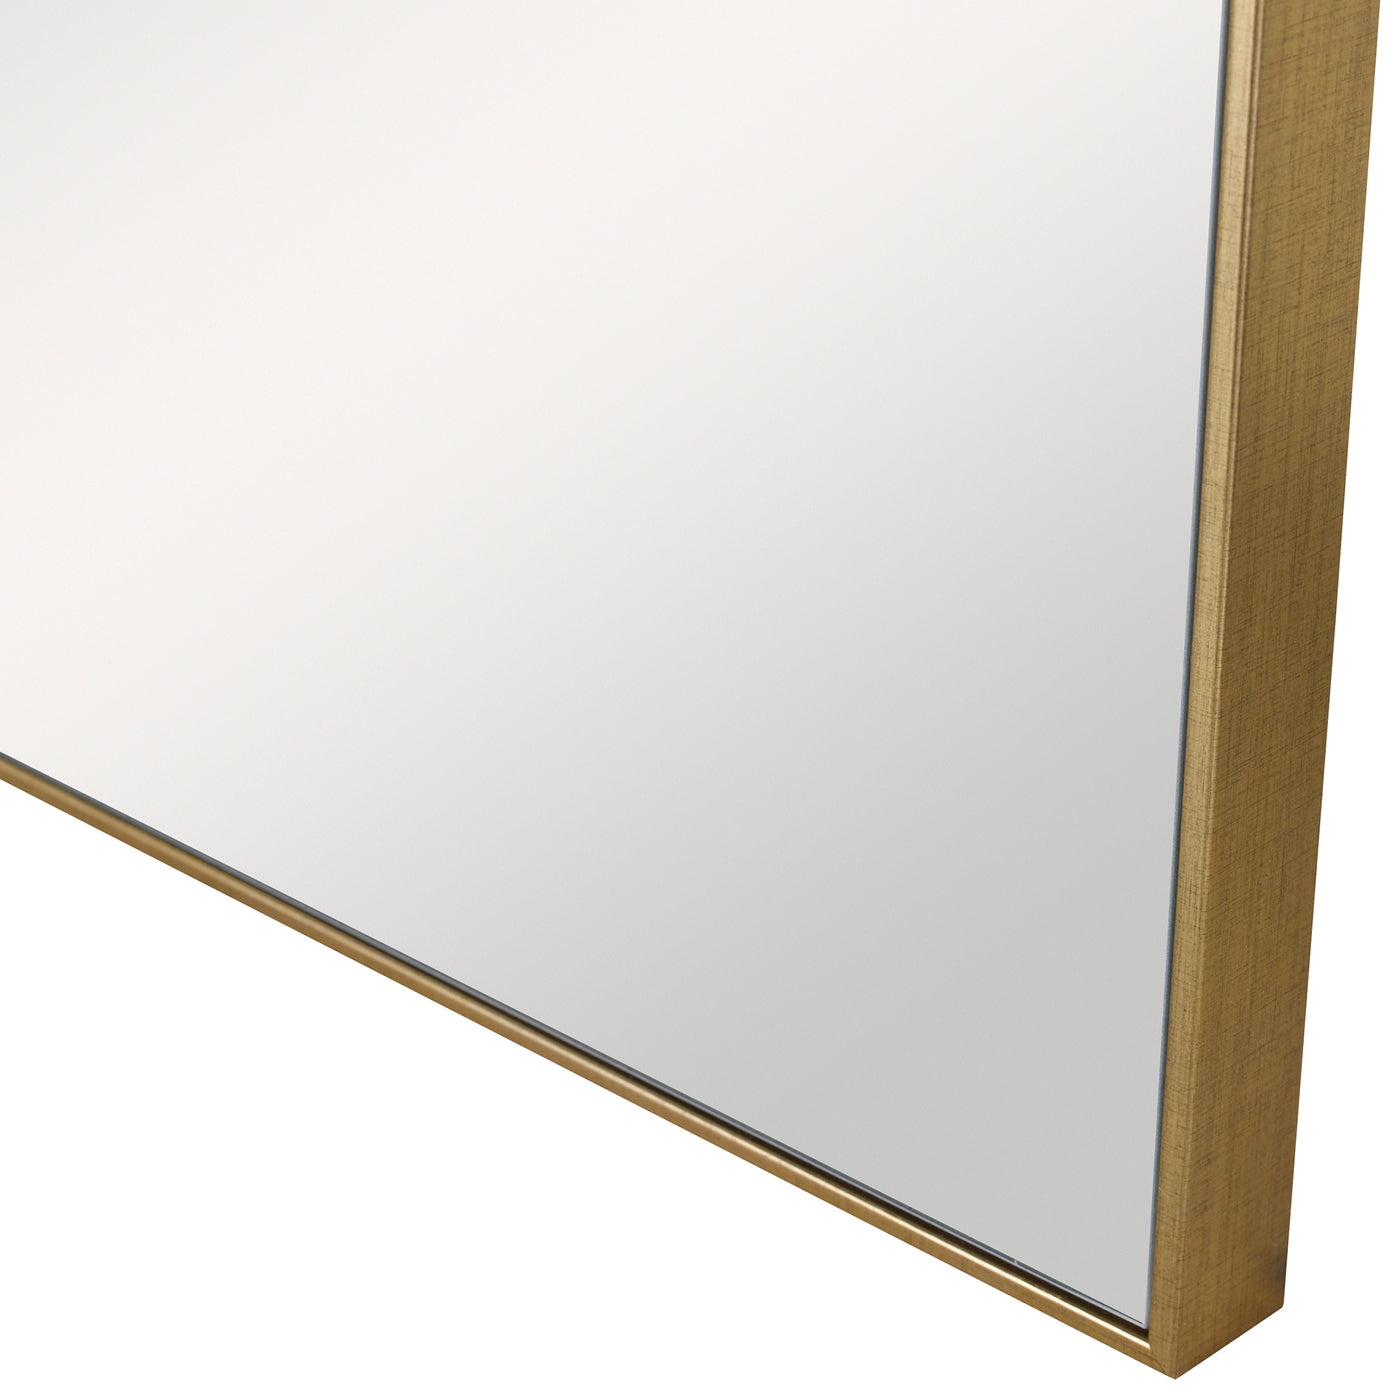 Sleek And Sophisticated, This Square Mirror Features A Clean And Simple Frame Finished In Brushed Gold. Perfect For Groupi...